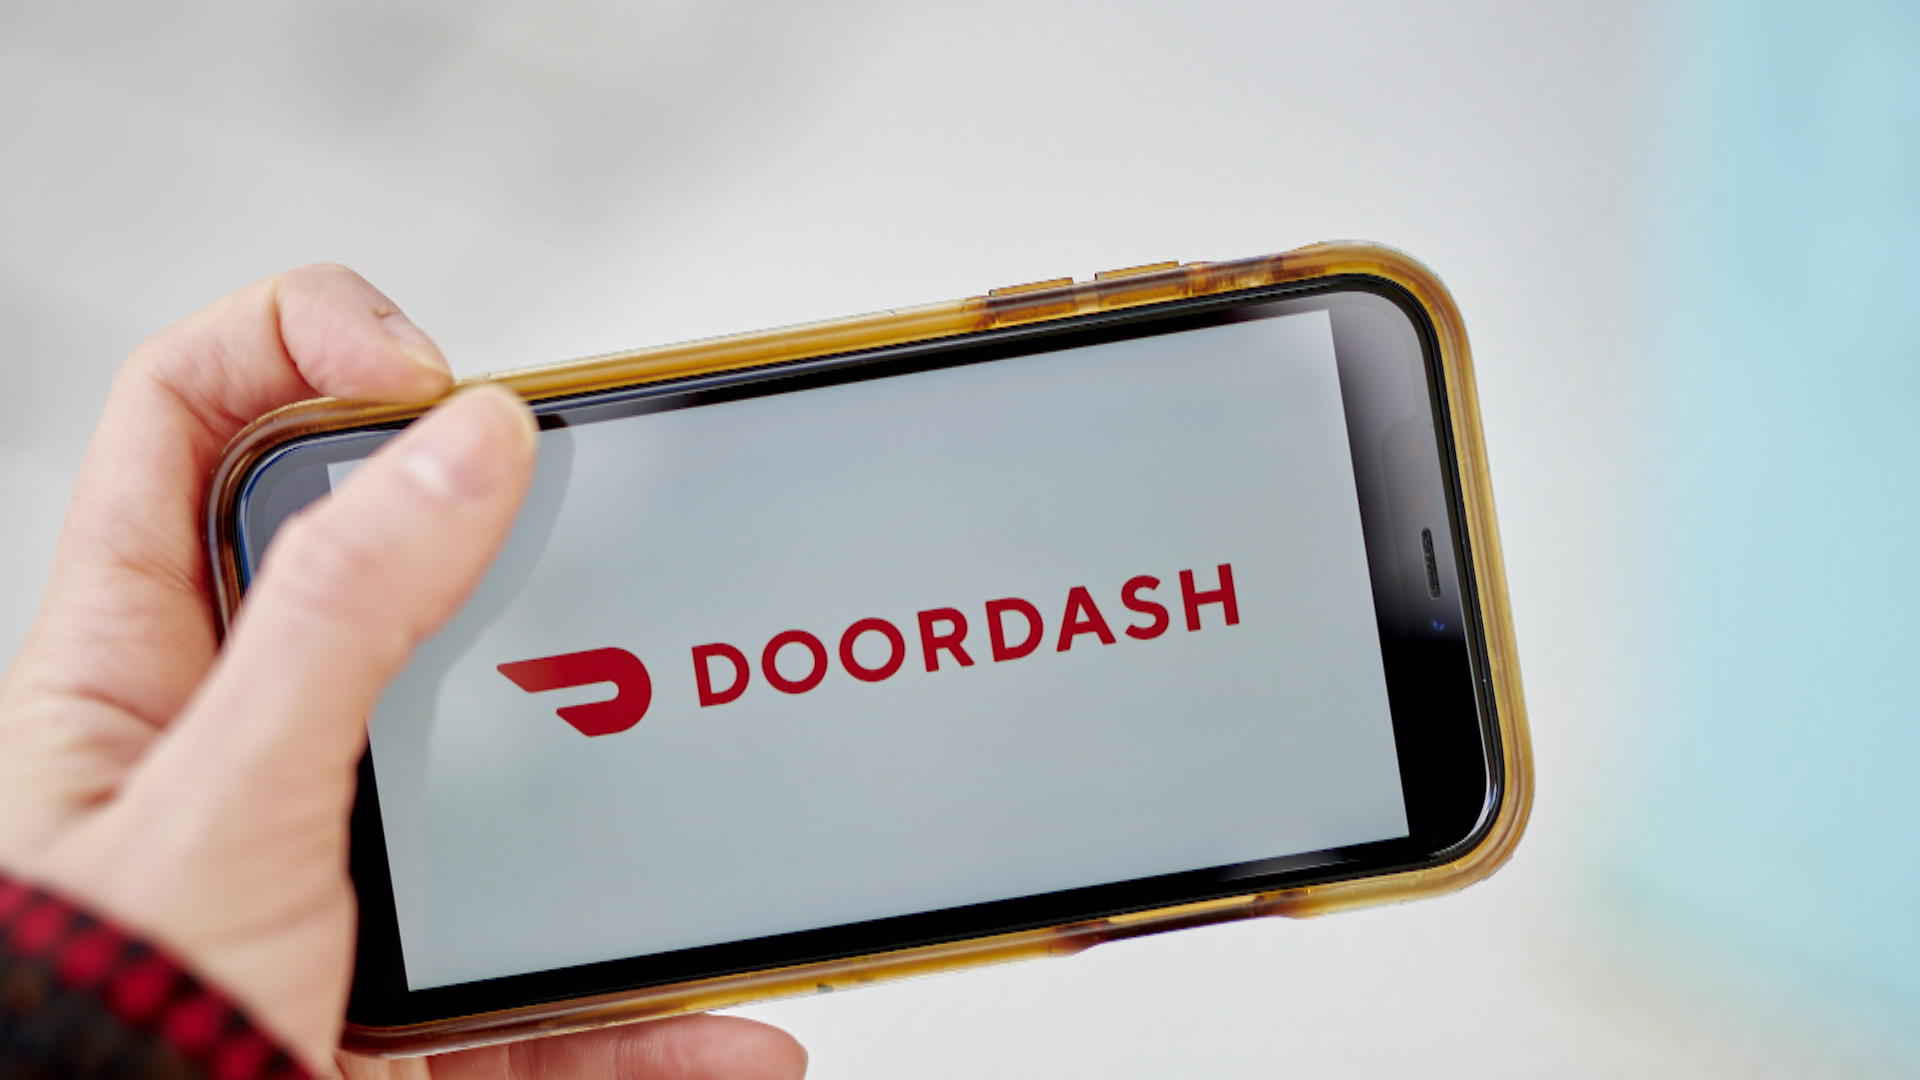 Food Delivery Services Are Here to Stay: DoorDash CFO